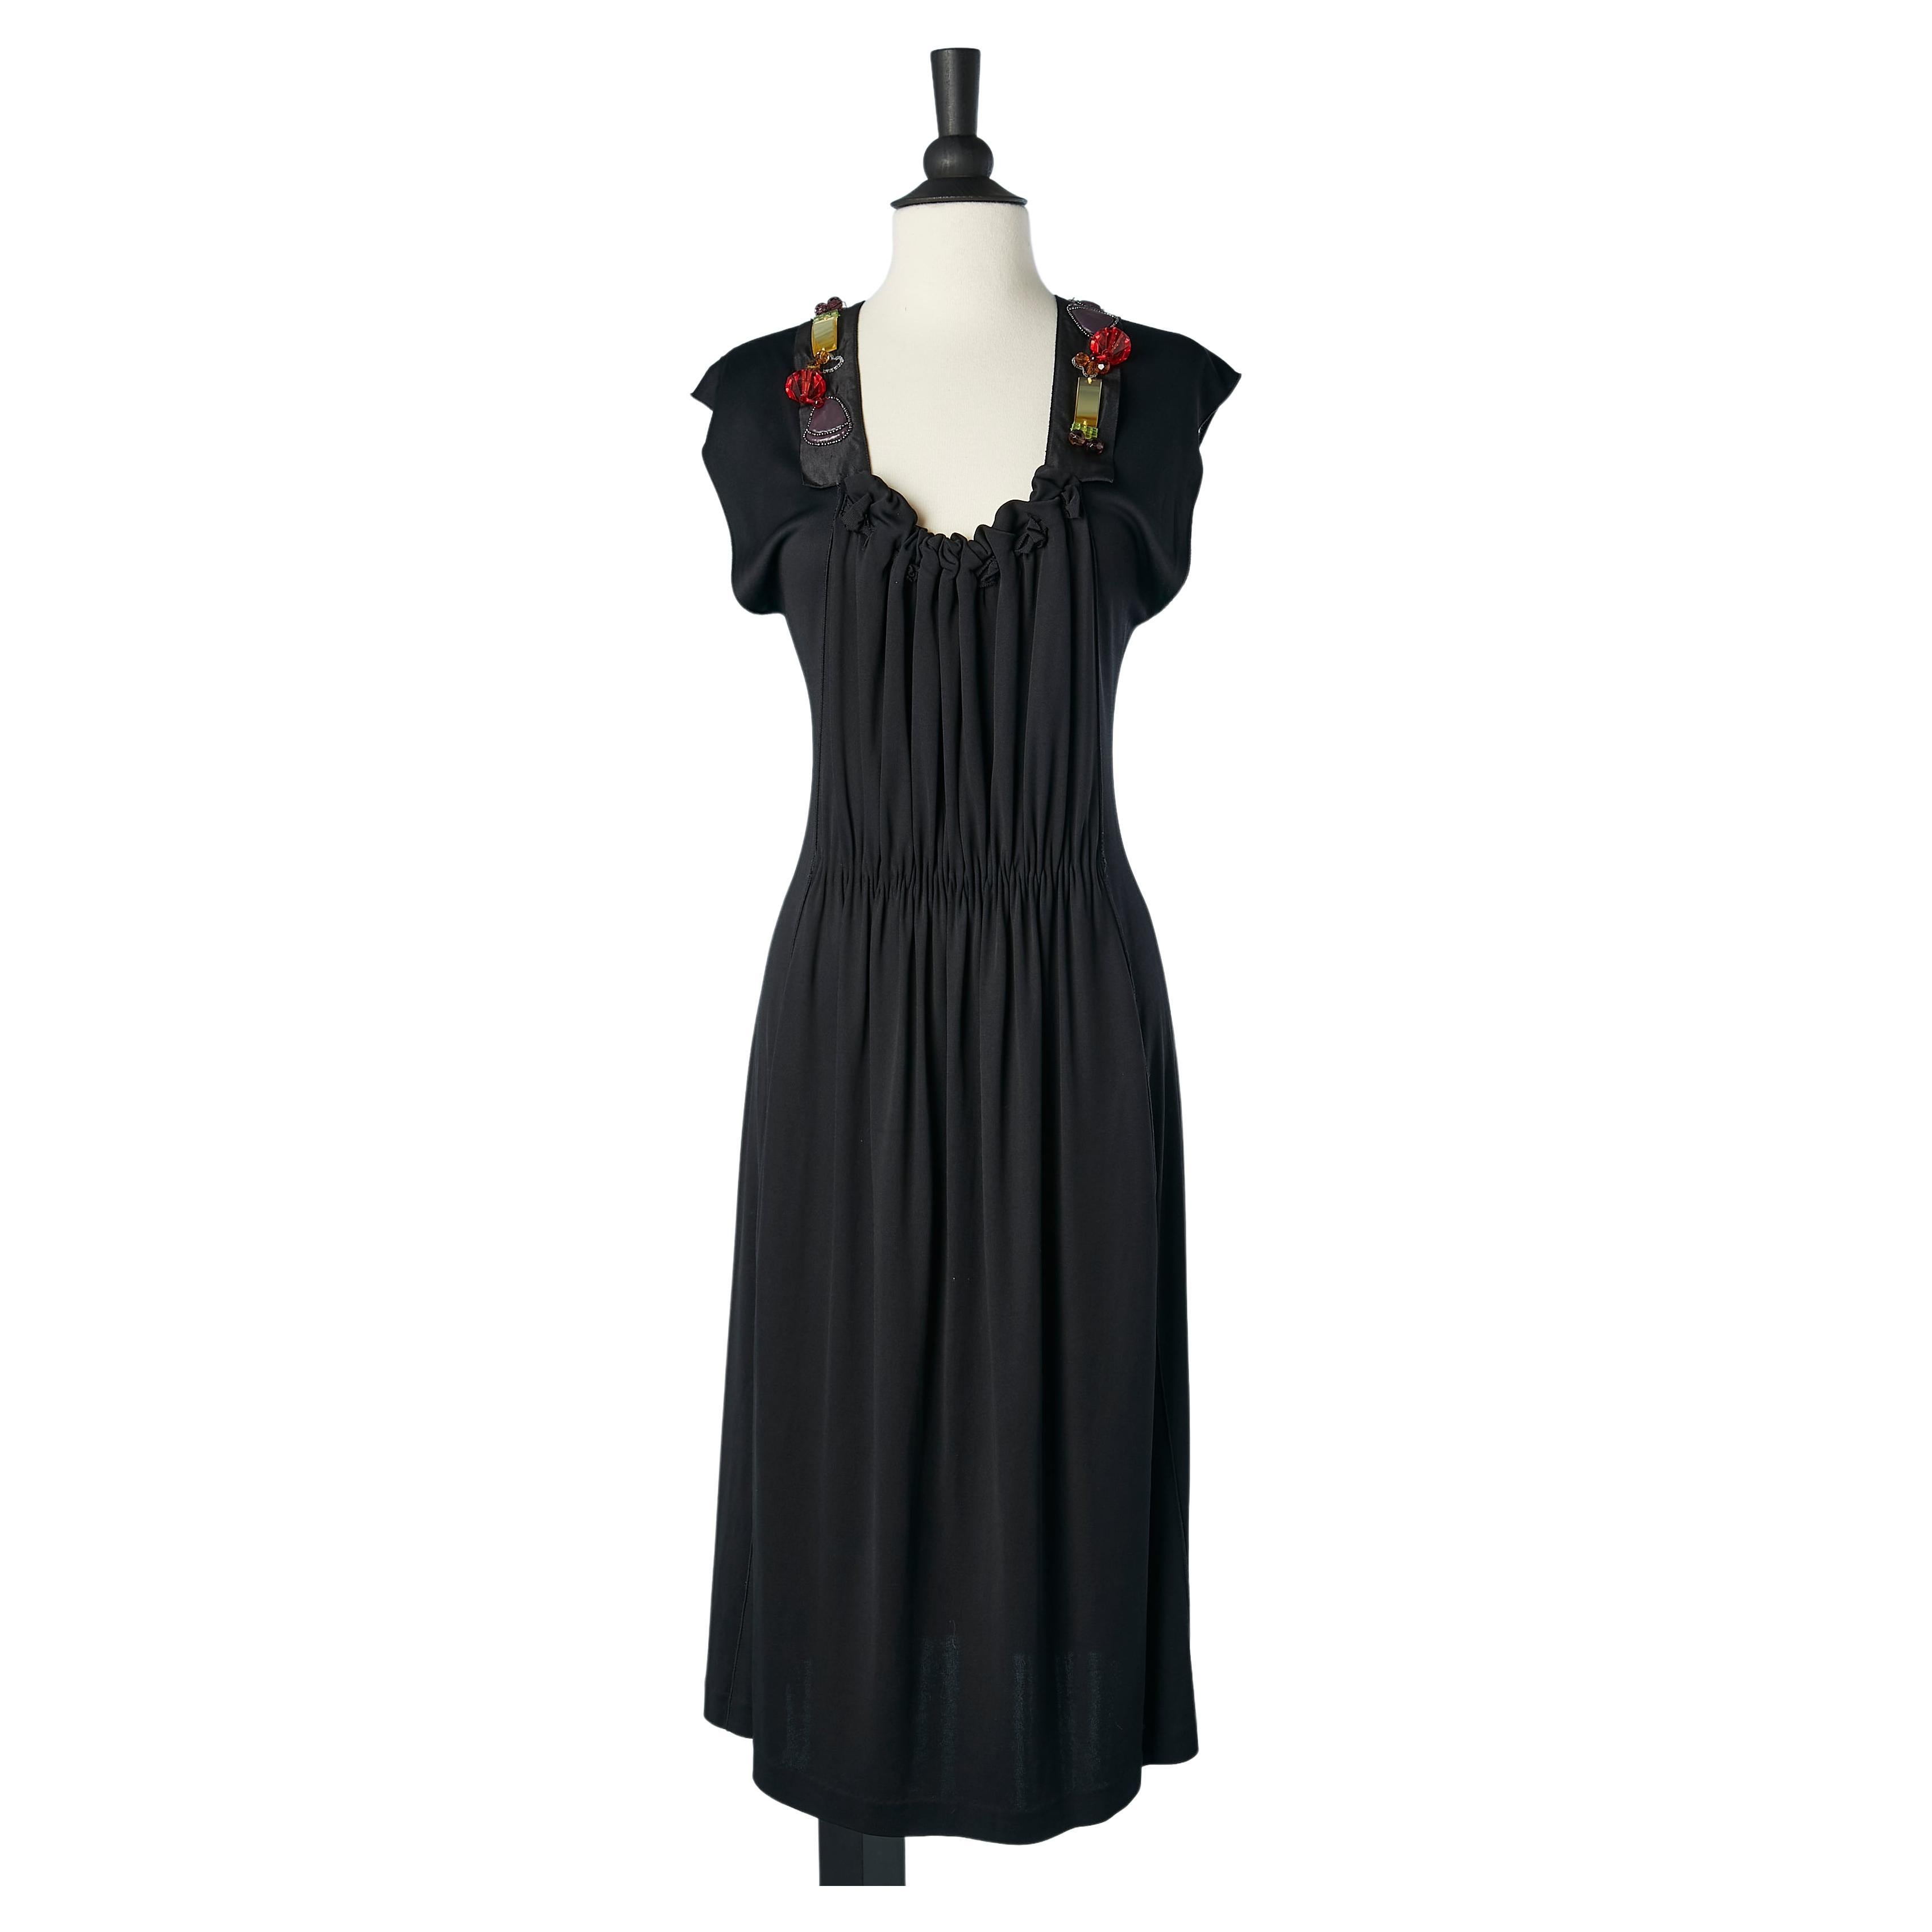 Black gather cocktail dress with beads  embellishment Yves Saint Laurent  For Sale